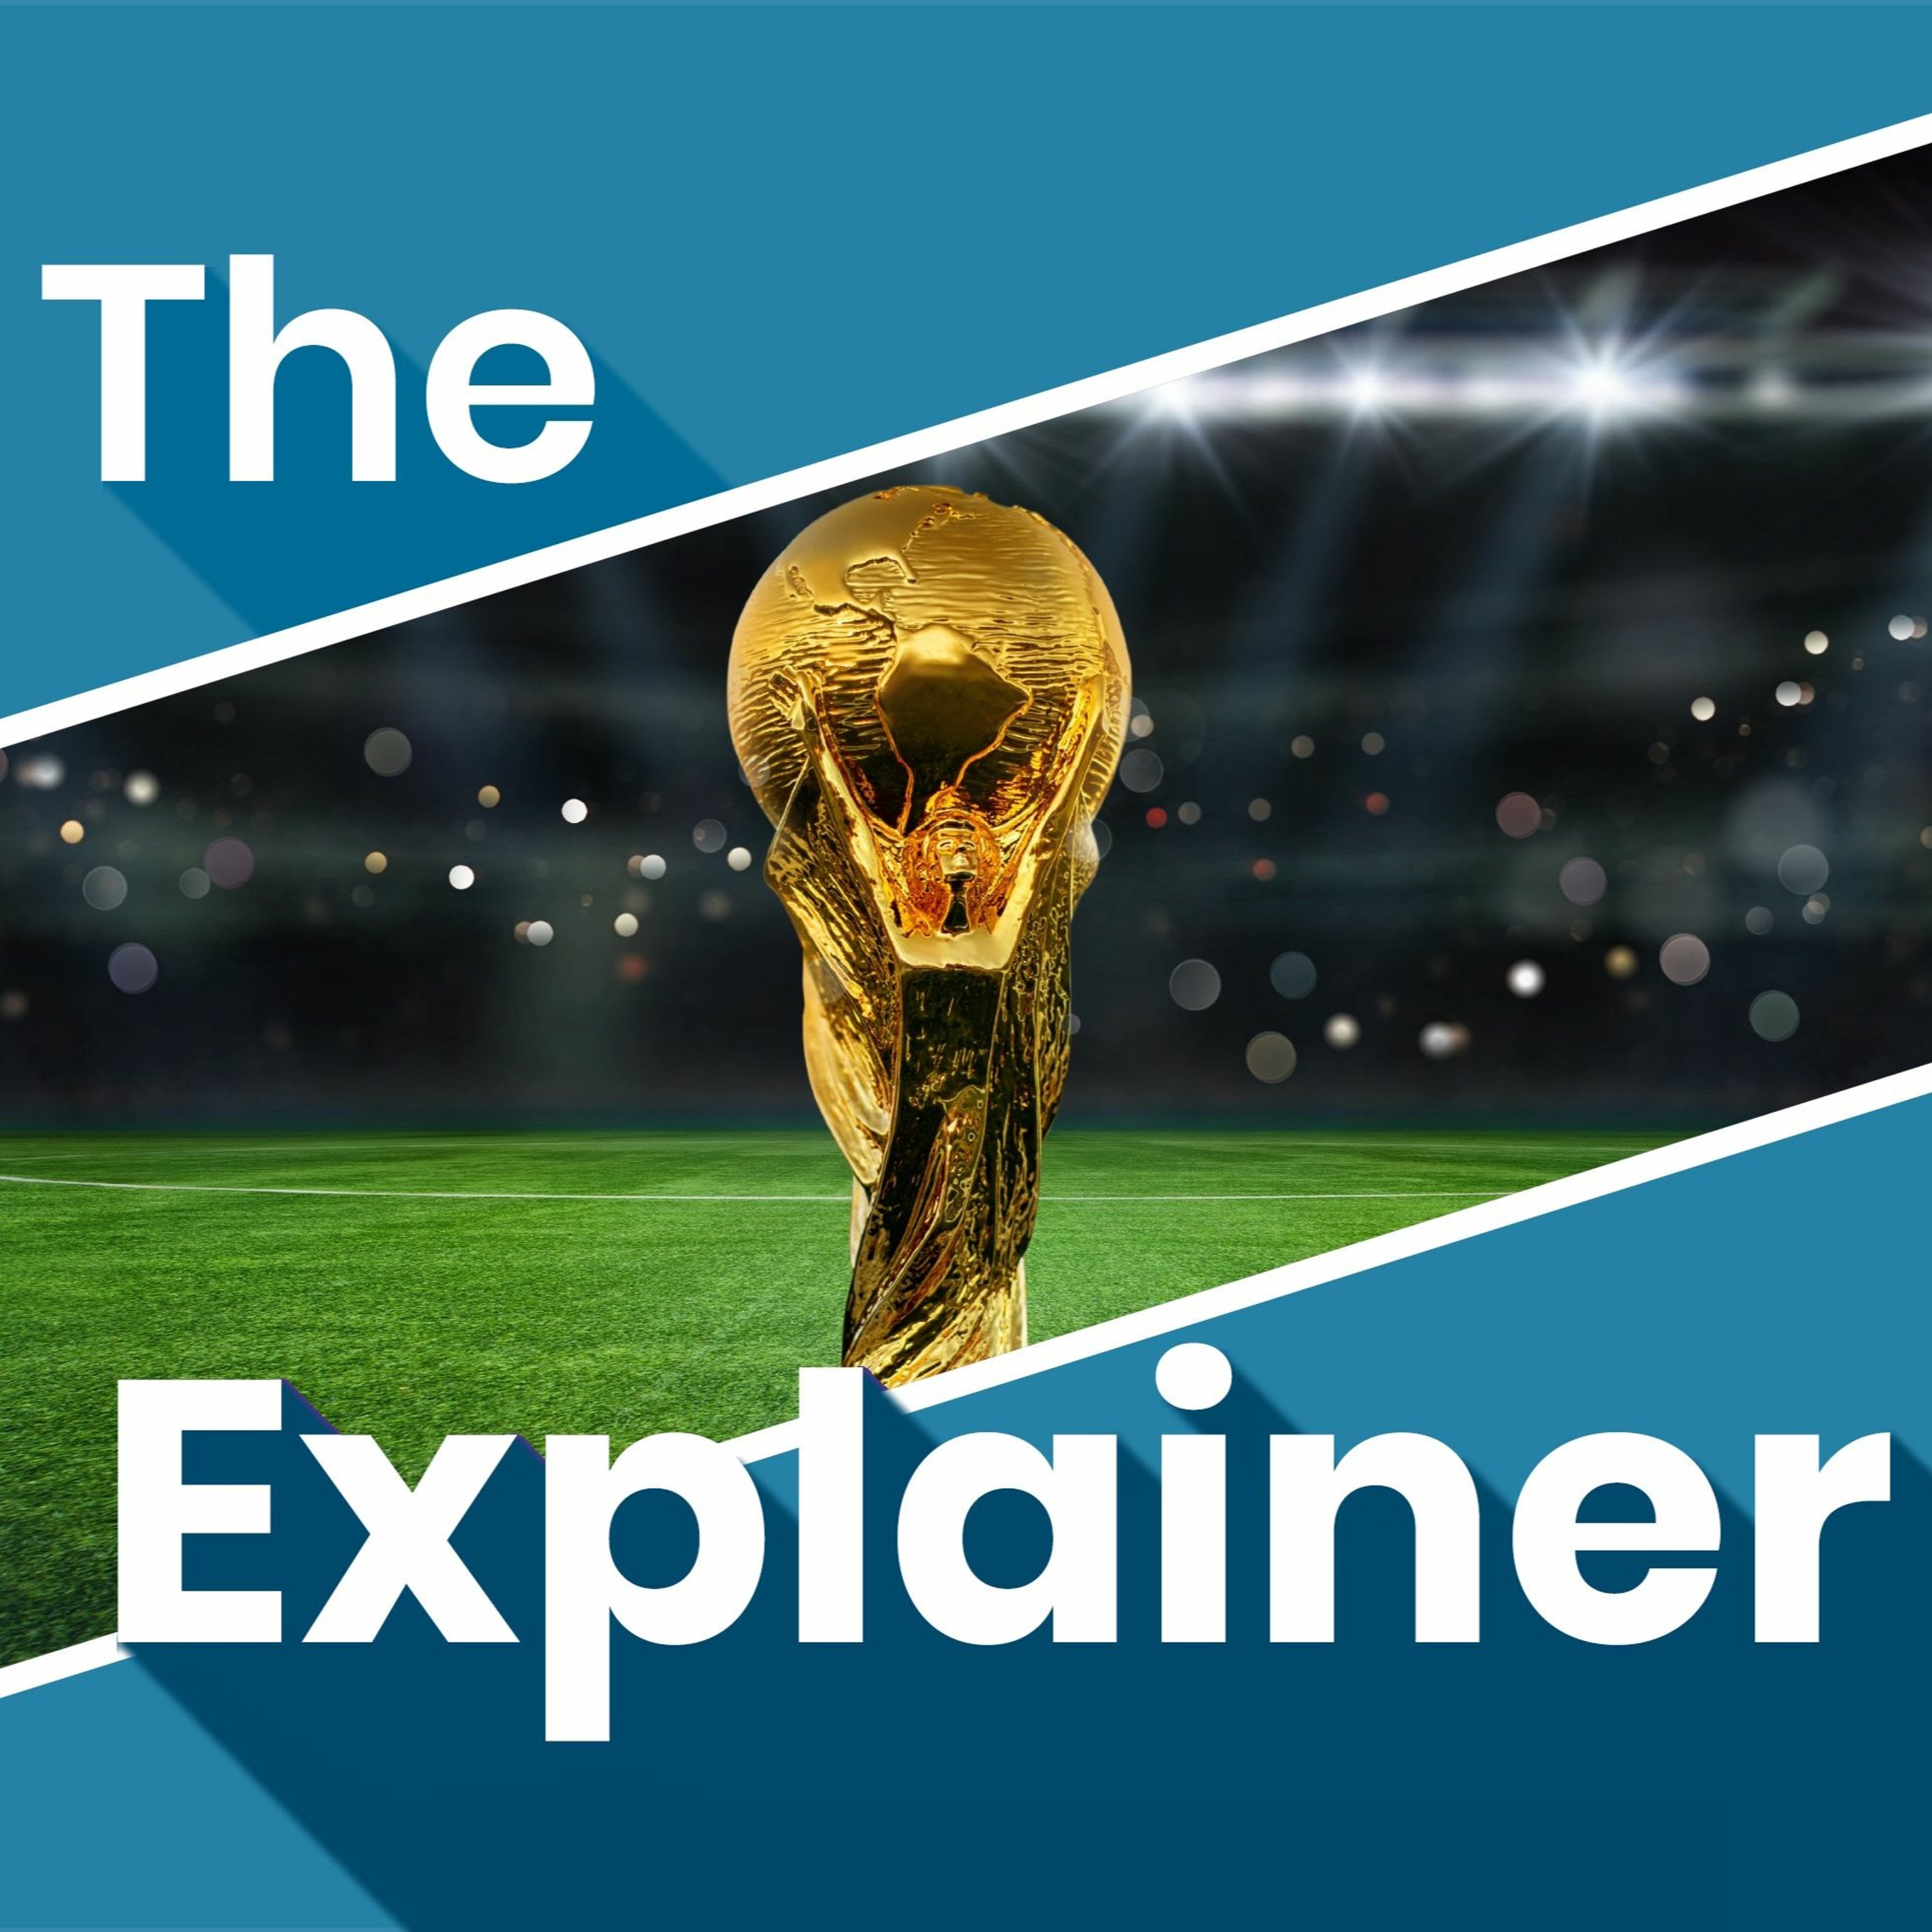 What’s happening with the 2022 FIFA World Cup?